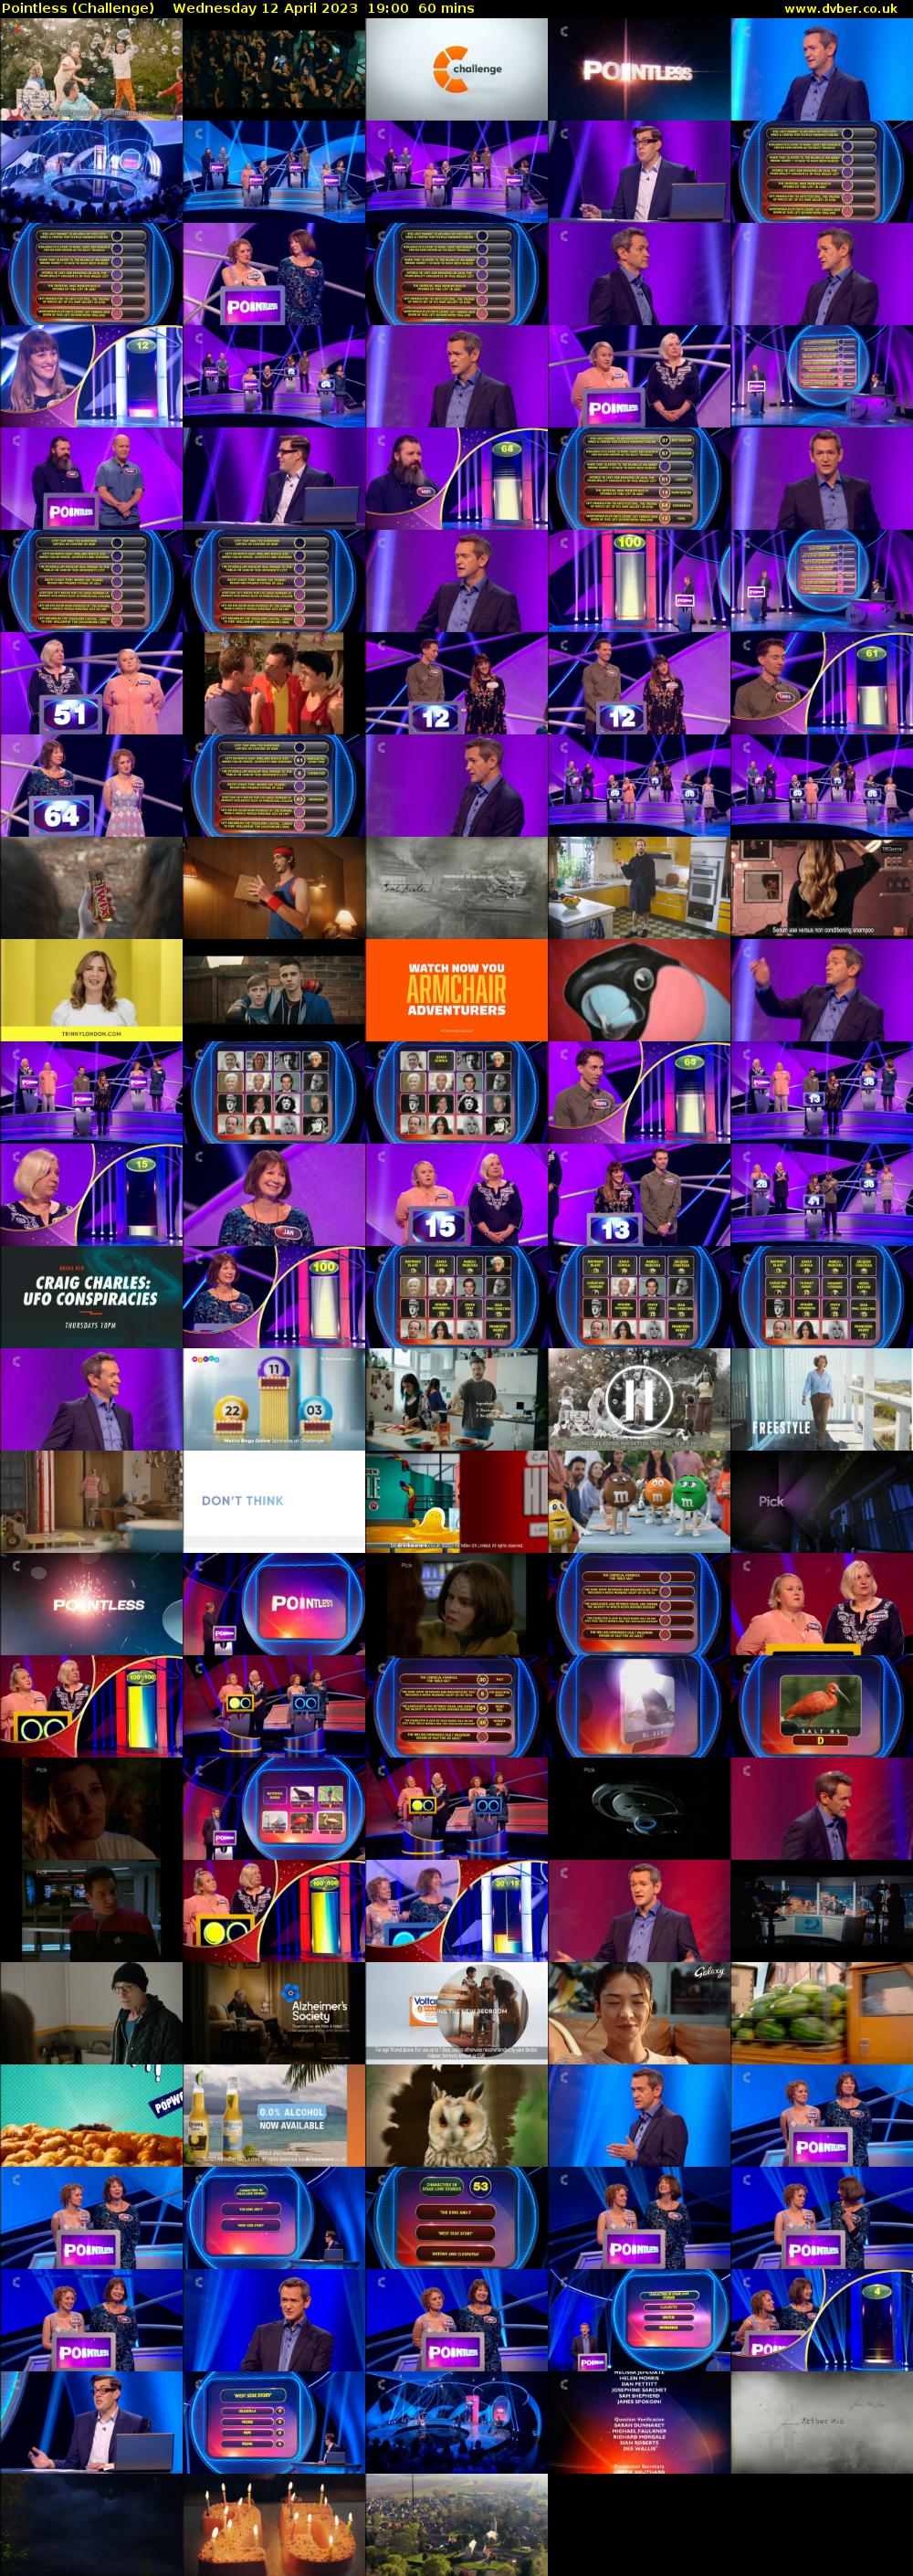 Pointless (Challenge) Wednesday 12 April 2023 19:00 - 20:00